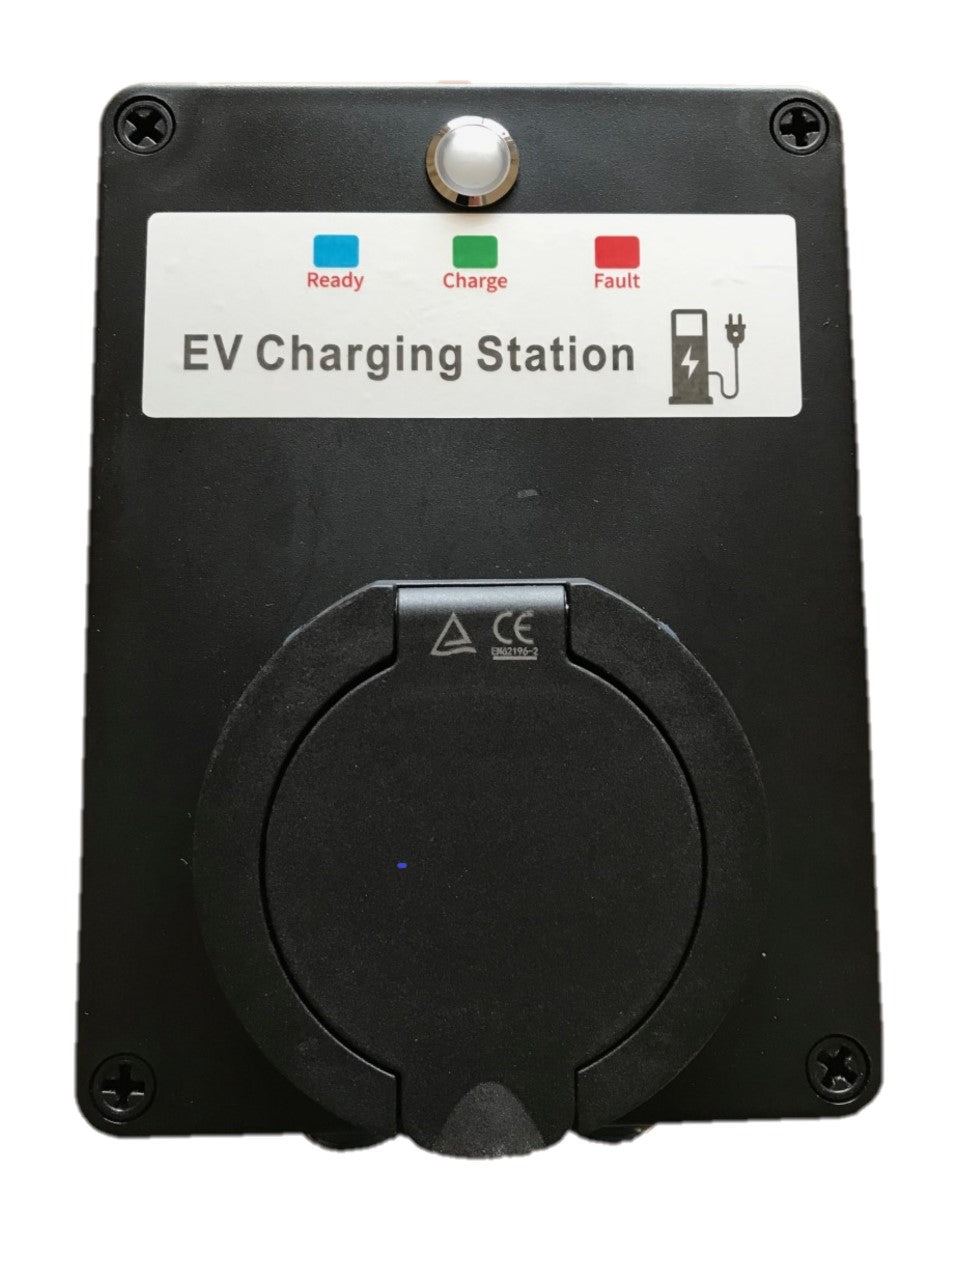 22kw, 3 phase EV Electric Vehicle Charge Point - Universal Type 2 Socket - 6mA DC protection included